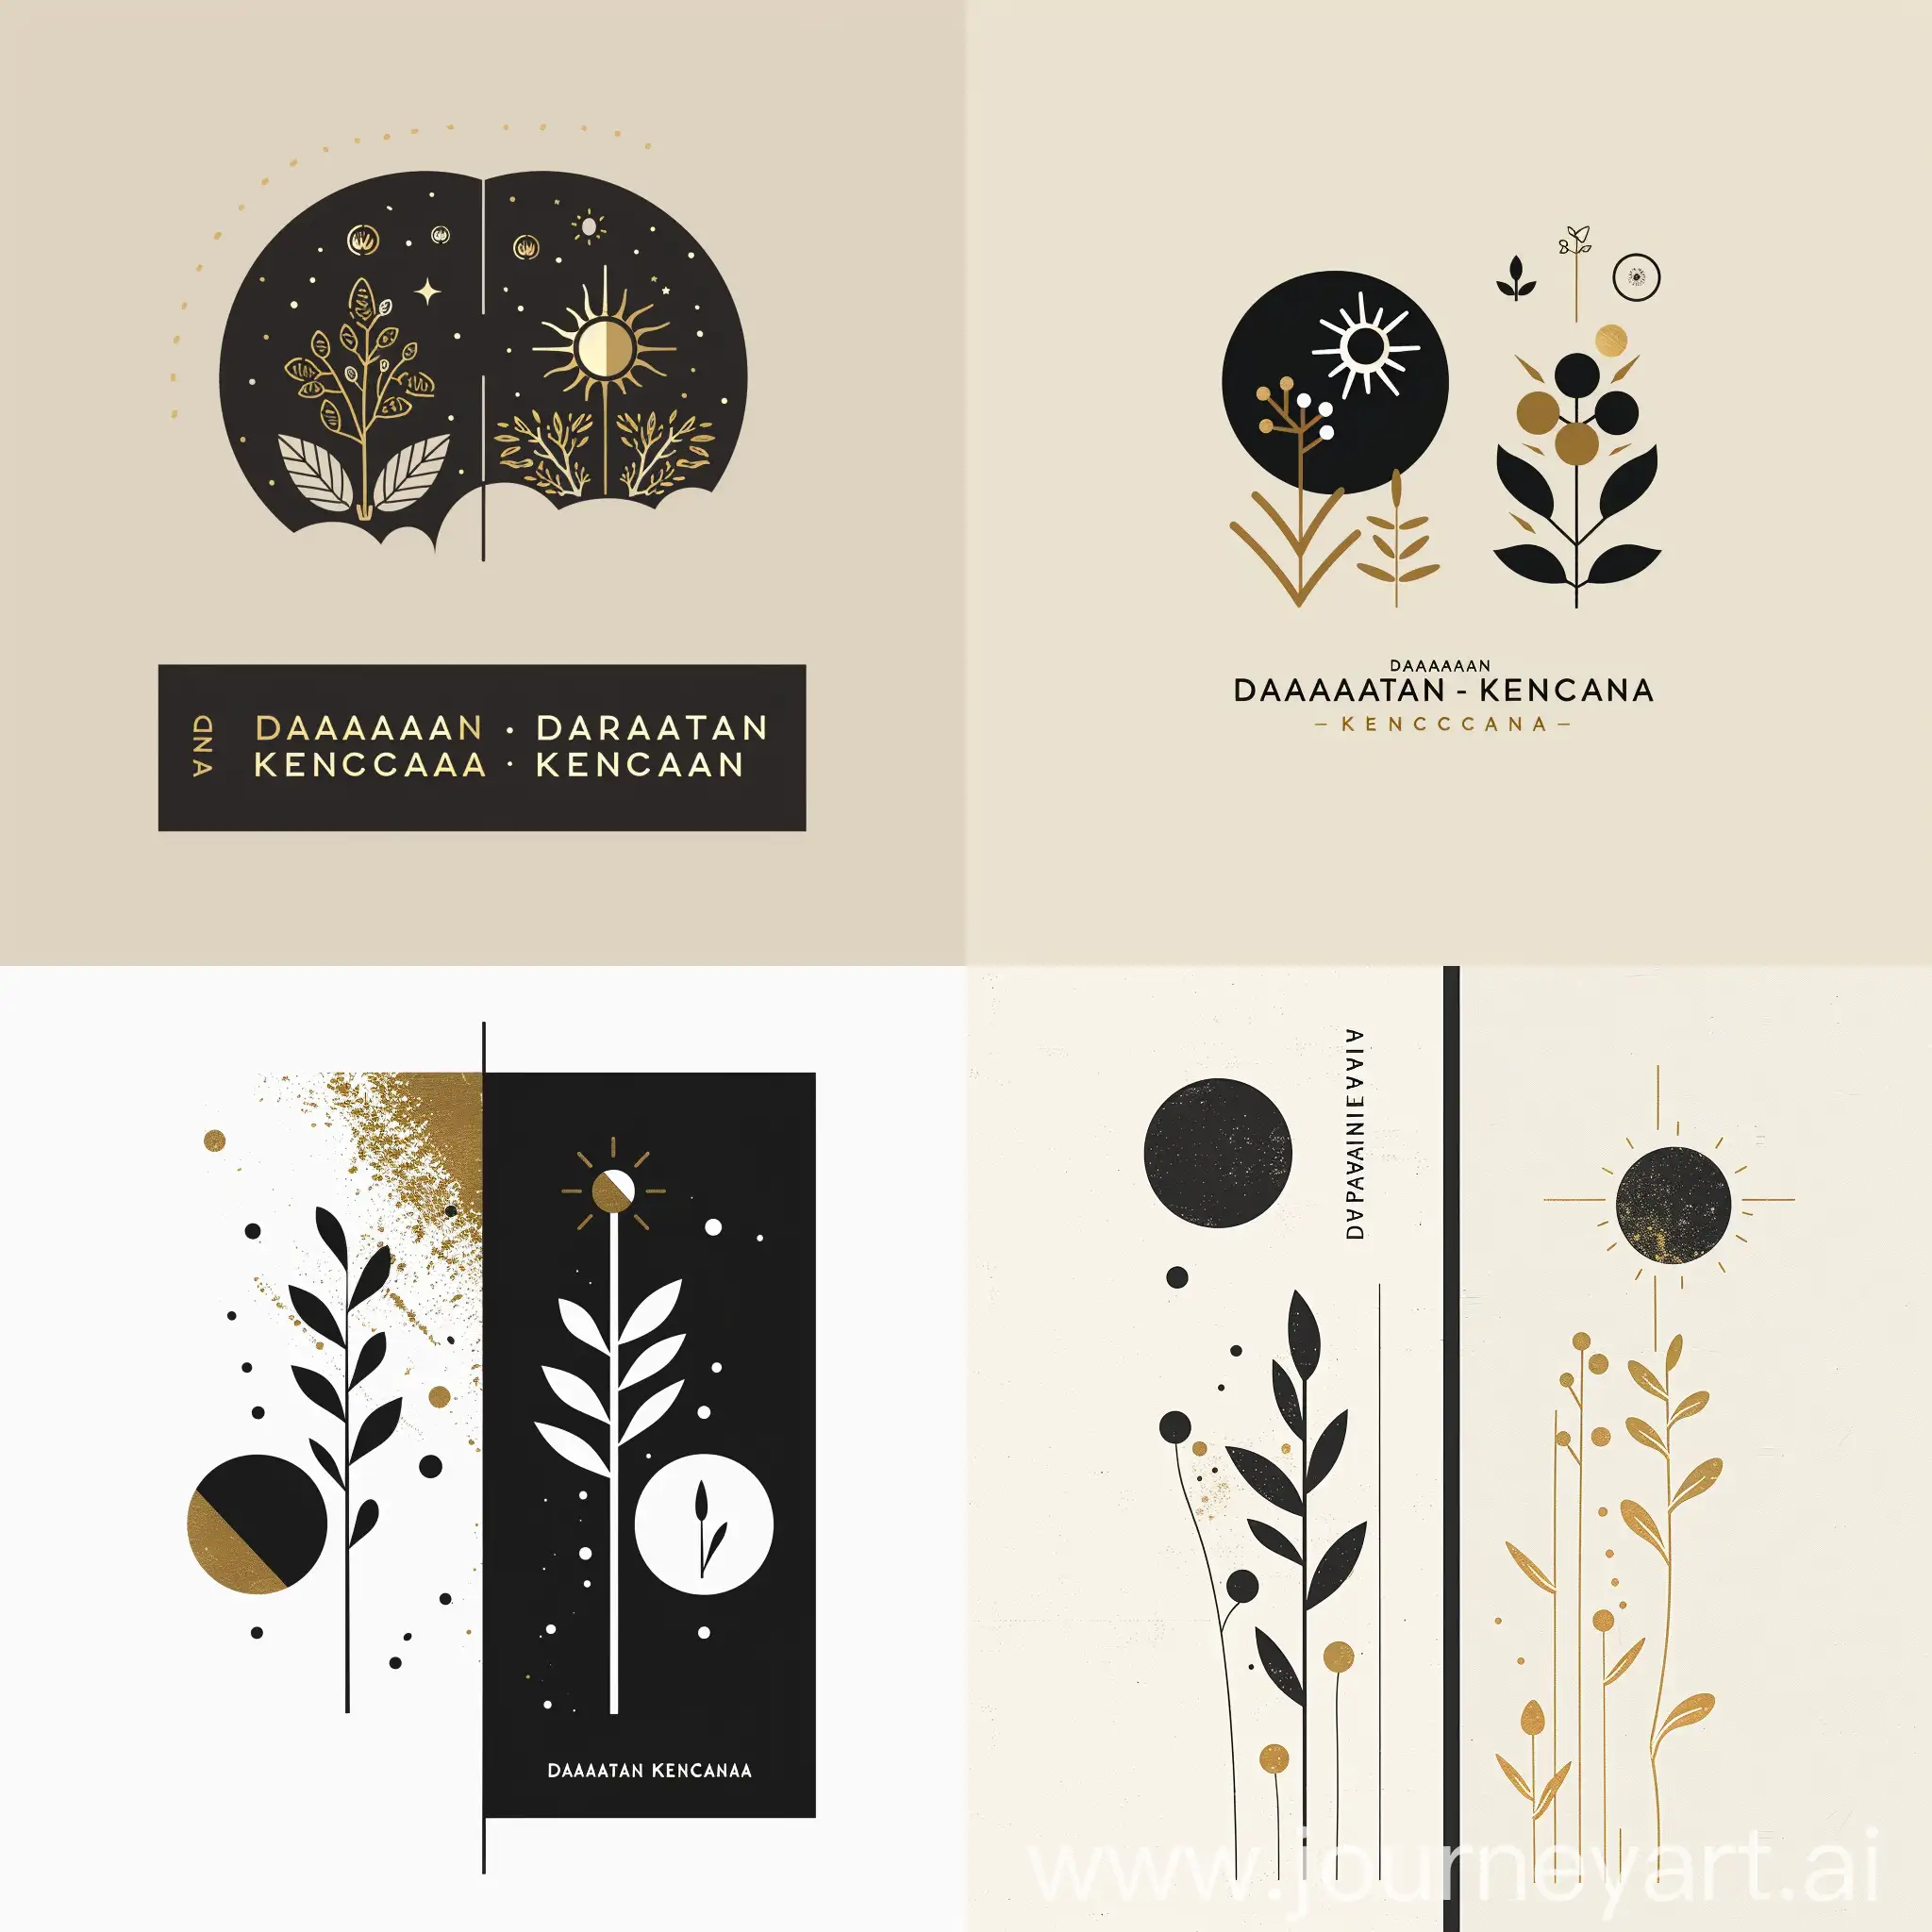 Please create a logo for a fertiliser brand called "Daratan Kencana" in the style of Dieter Rams. Make it unique, simple, yet creative. incorporate icons of plants and the sun. Please generate 2 different options and use the following colors: black, white and gold. please add "daratan kencana" in text form